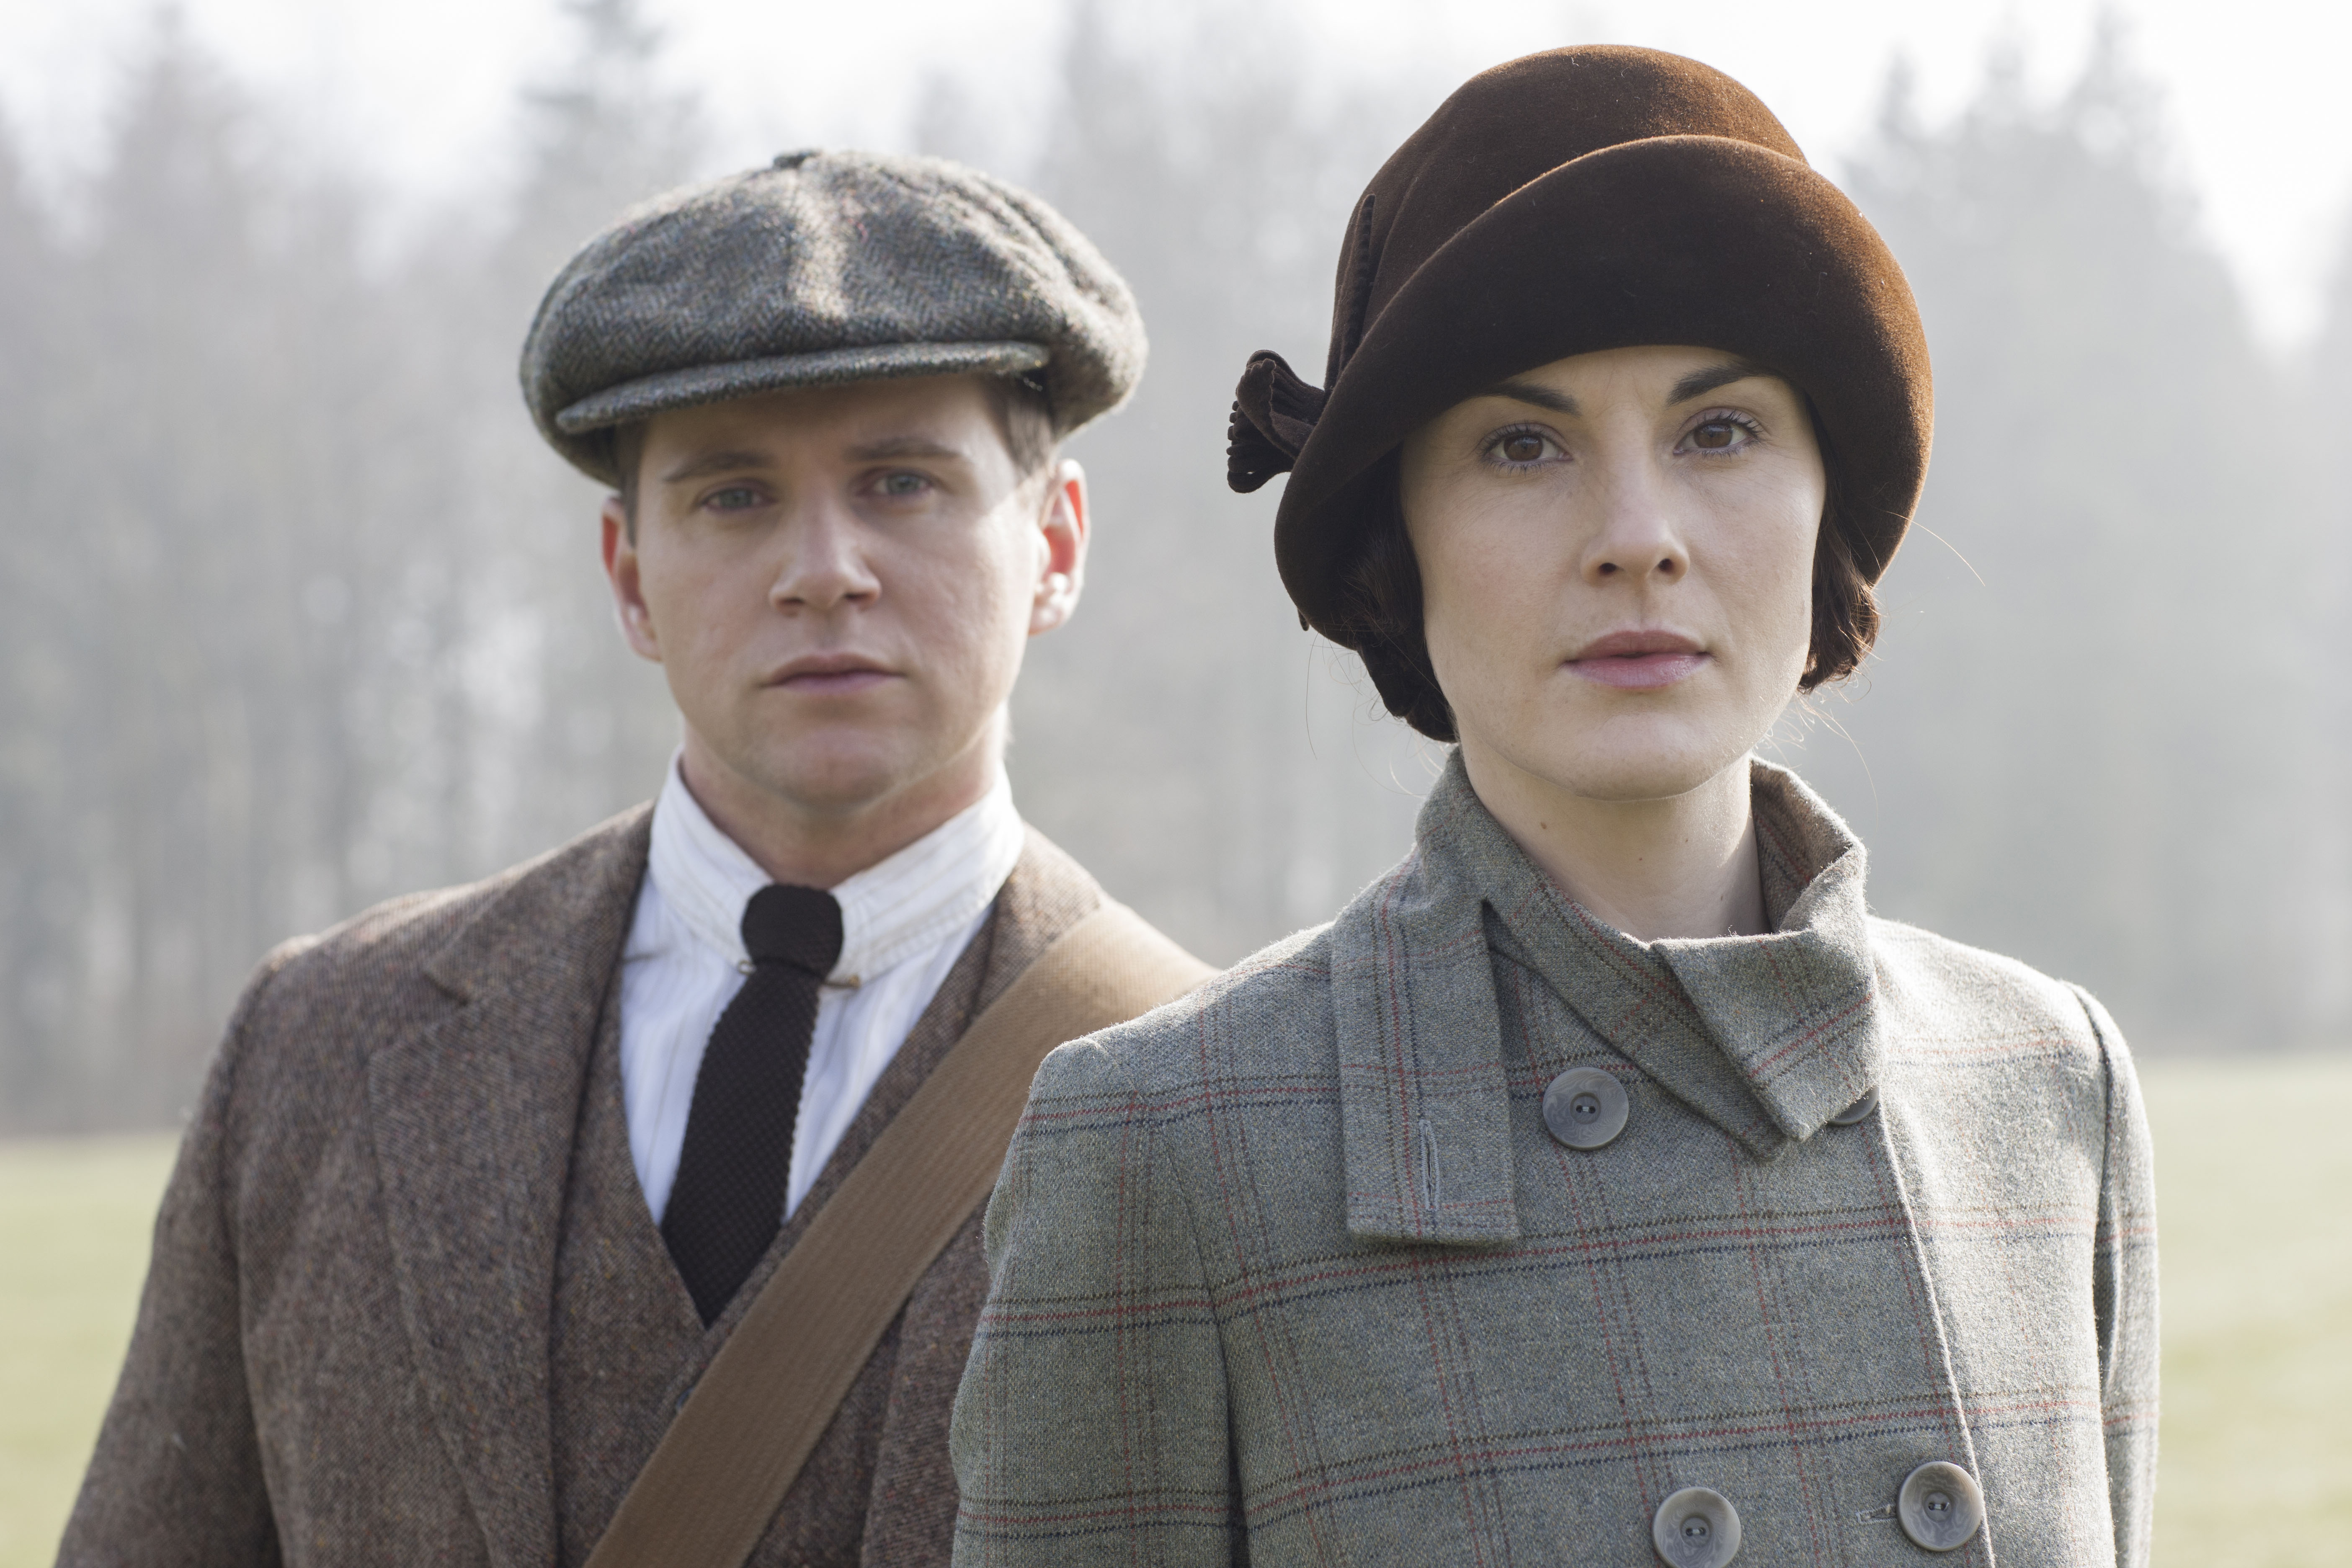 Michelle Dockery and Allen Leech in "Downton Abbey" (Photo: Courtesy of (C) Nick Briggs/Carnival Film &amp; Television Limited 2014)